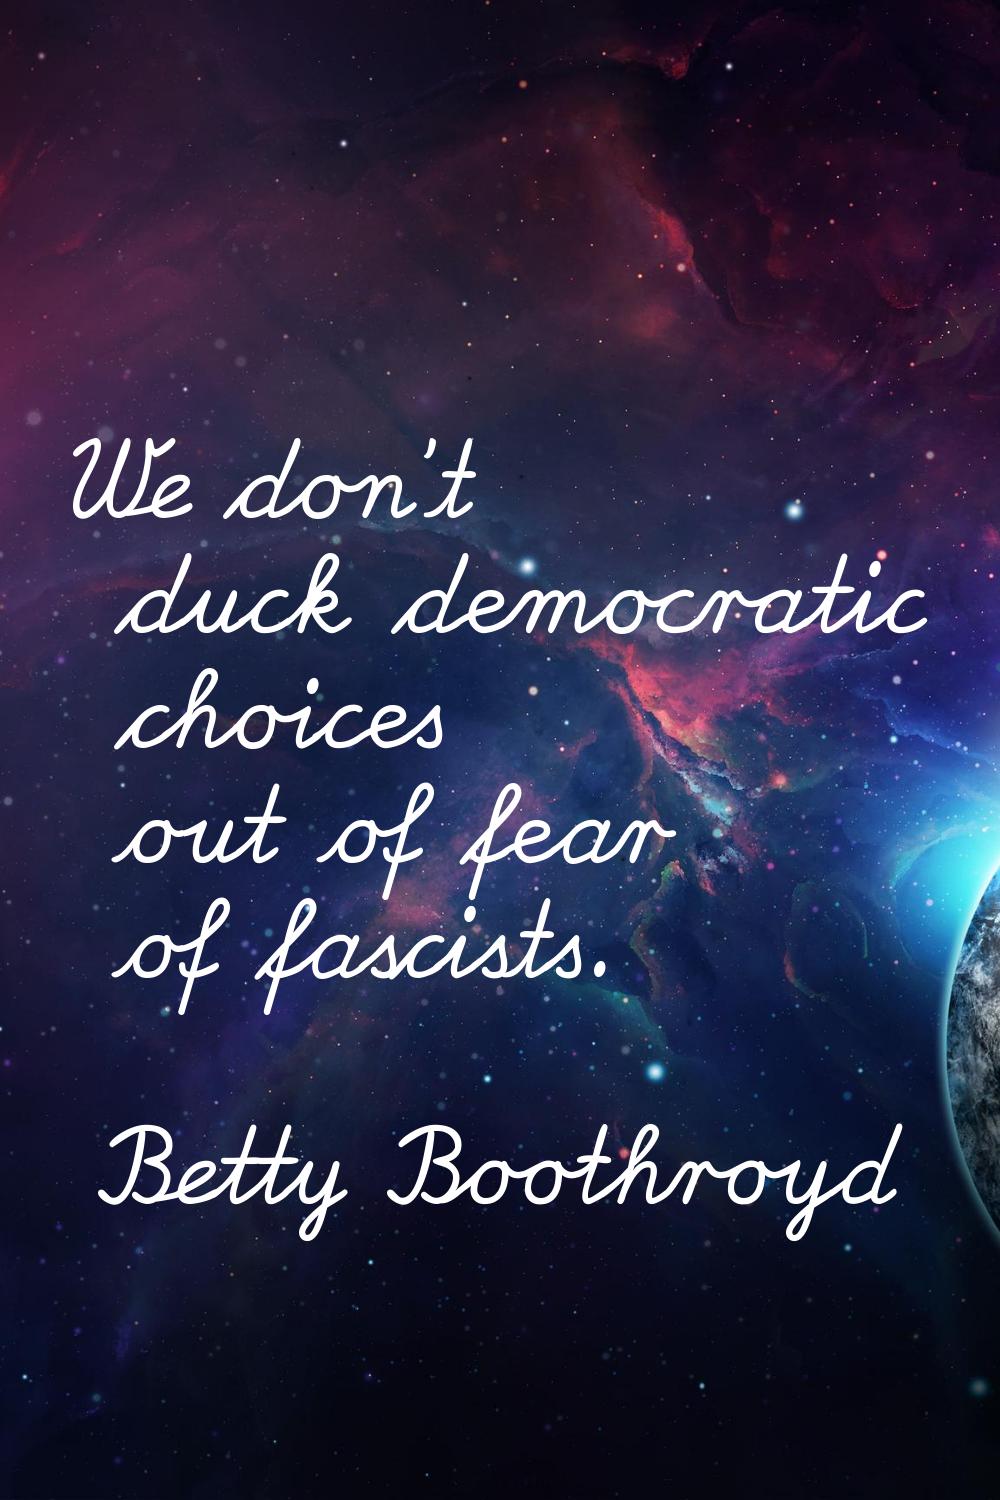 We don’t duck democratic choices out of fear of fascists.